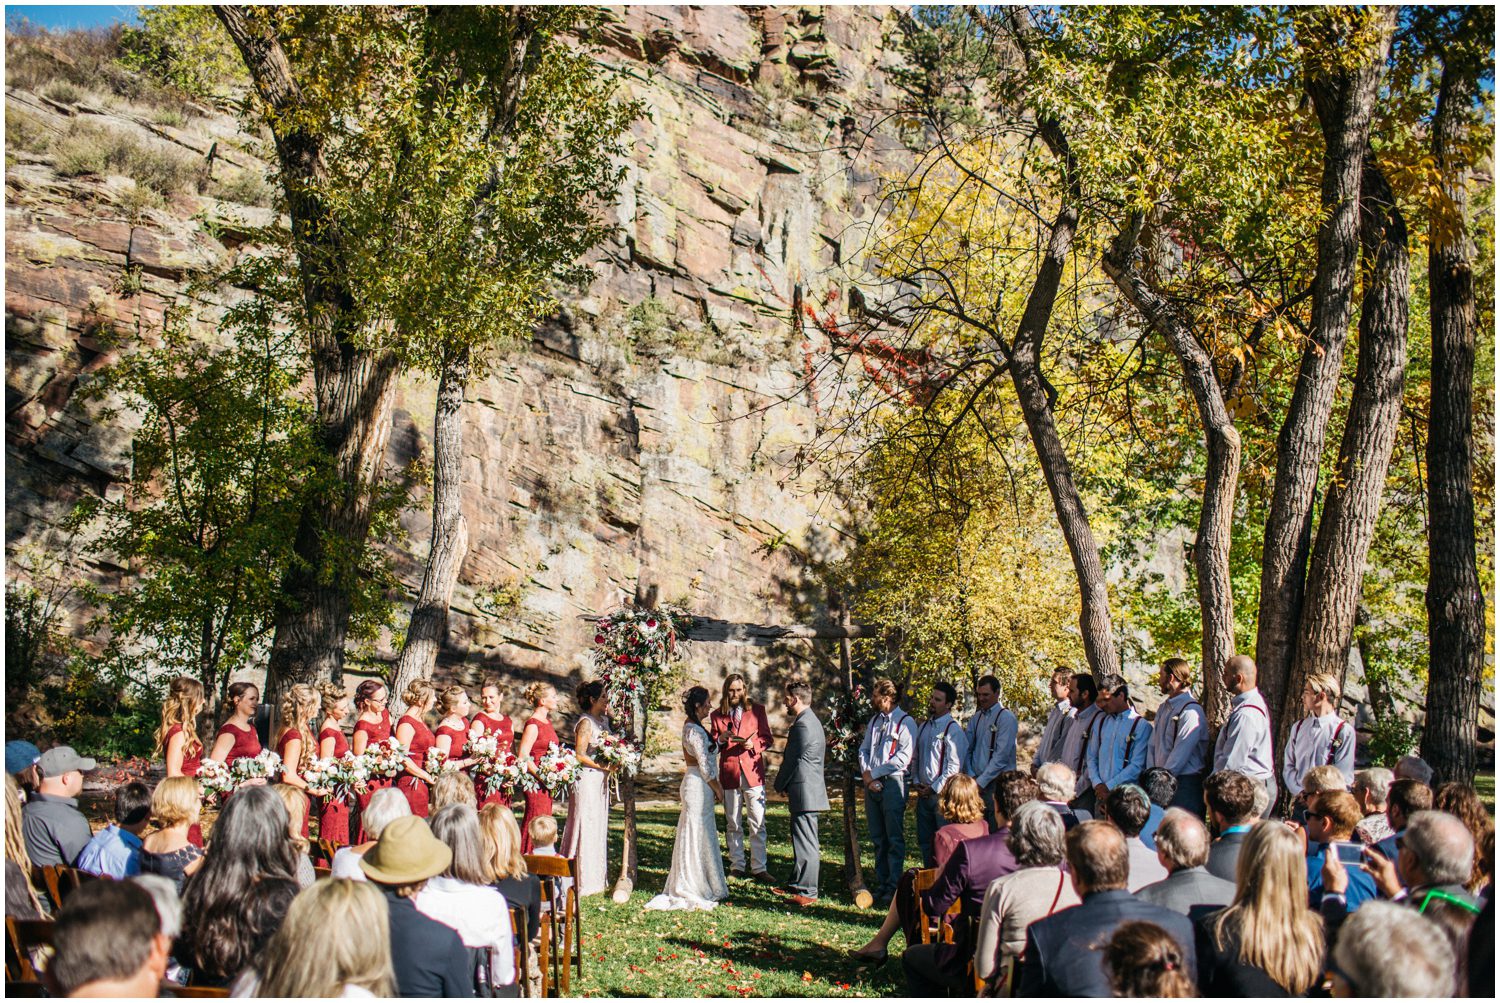 Large bridal party, 20 person bridal party, bridal party photos, unique bridal party photos, Burgundy wedding color, Planet Bluegrass Wedding, Lyons Colorado Wedding, Lace and Lillies, Colorado Wedding Photographer, A Spice of Life, Boho Wedding Inspiration, Burgundy wedding inspiration, Colorado Wedding